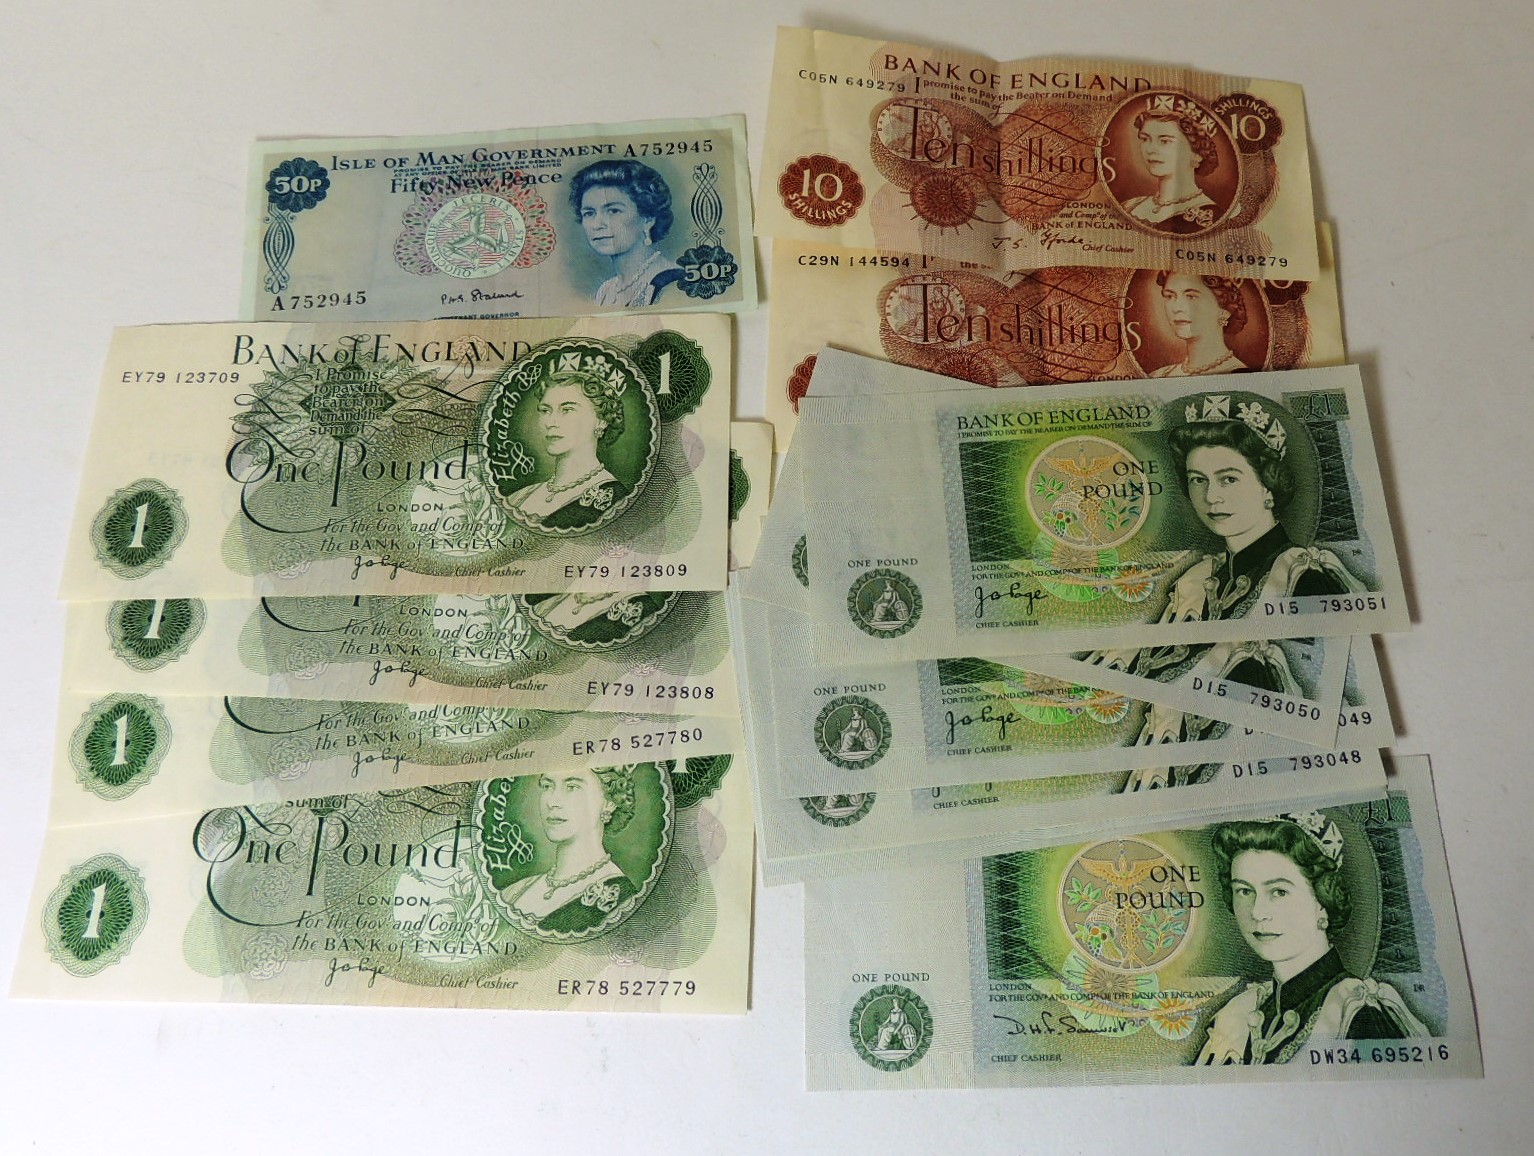 BANK OF ENGLAND - consecutive groups of £1 notes: Portrait series signed Page ER 78 527779/80 and